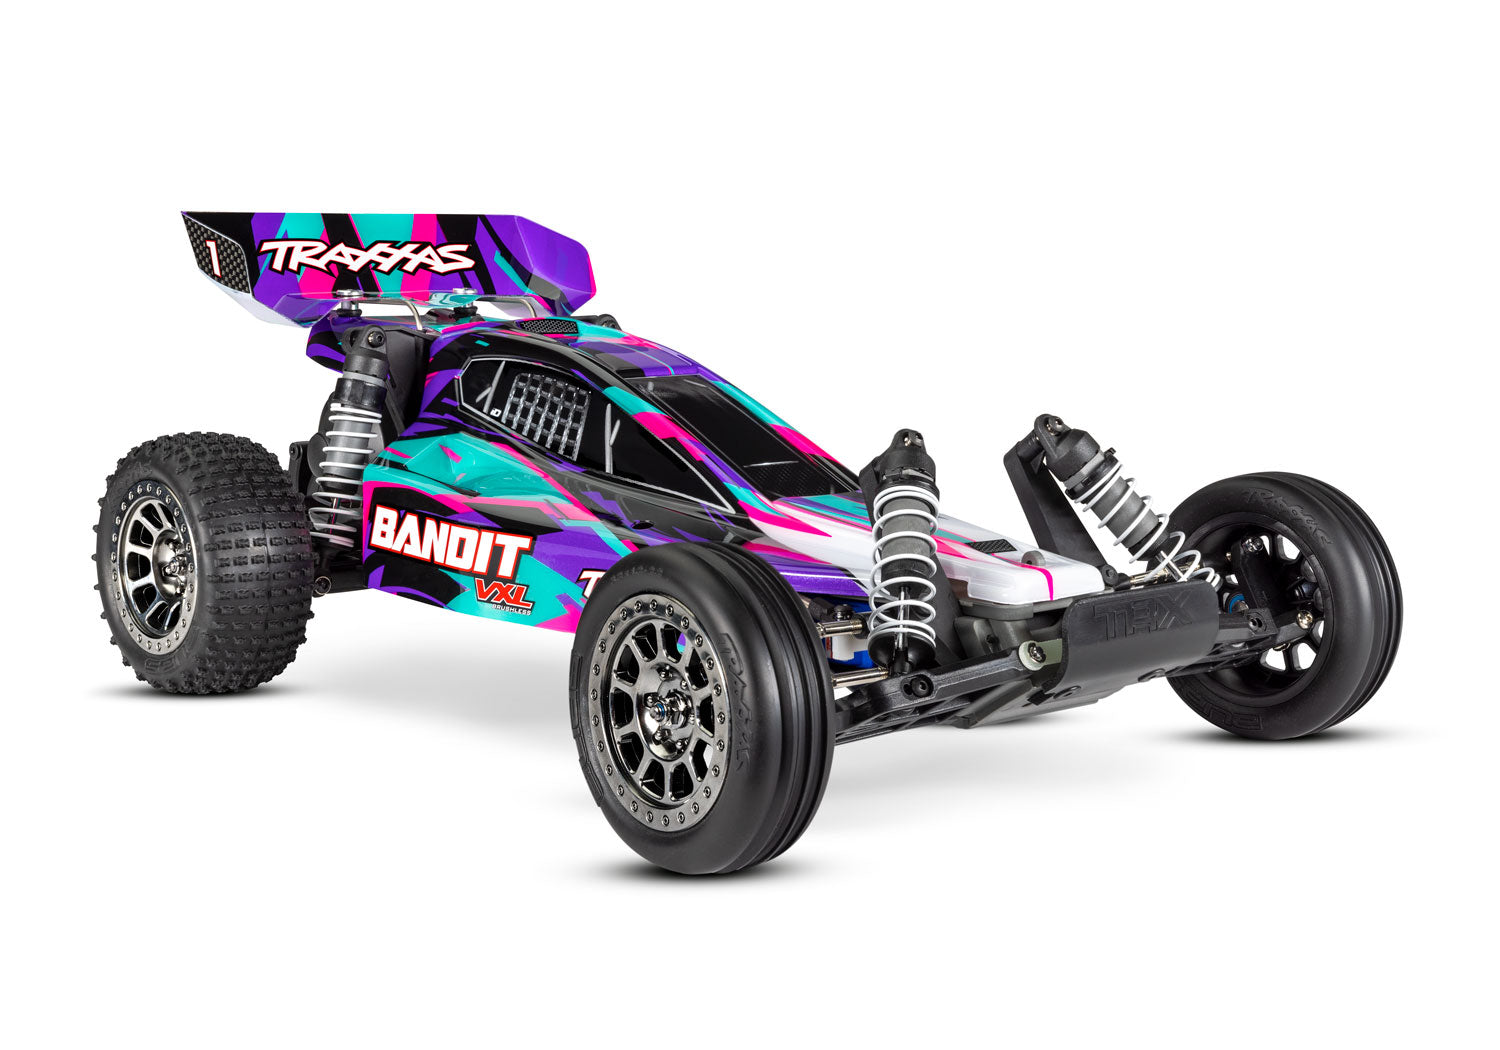 TRAXXAS 24076-74 Bandit® VXL 1/10 scale 2WD buggy. Fully assembled and RTR with TSM®, TQi™ 2.4GHz radio system, Velineon® brushless power system, Magnum 272R™ transmission, and ProGraphix® painted body.